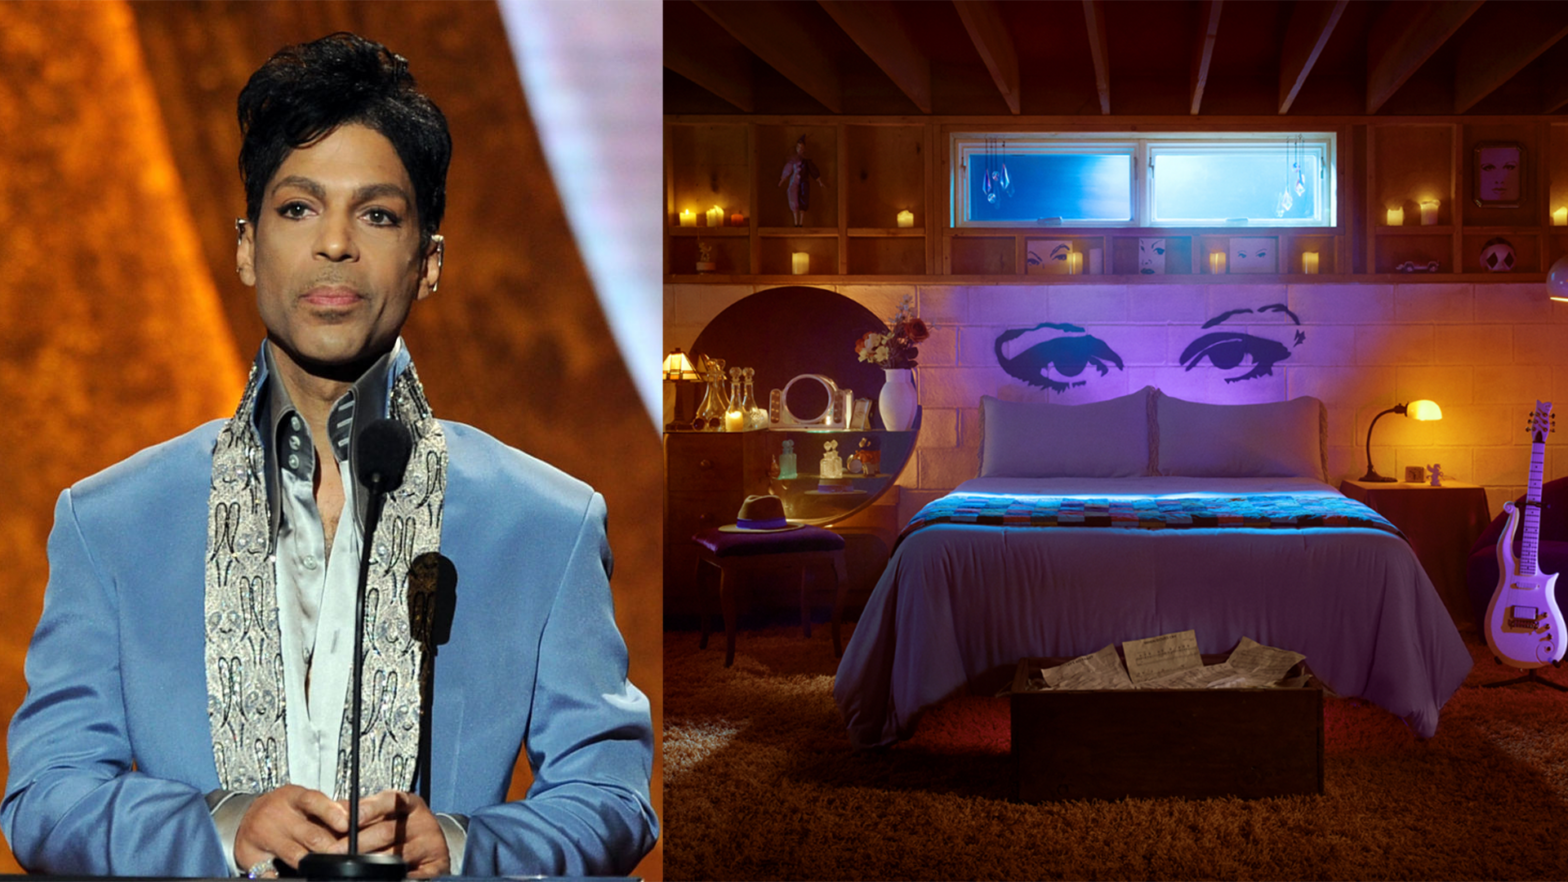 Tech Company Airbnb To Offer New Experiences Including A Chance To Stay In Prince’s Iconic ‘Purple Rain’ Home